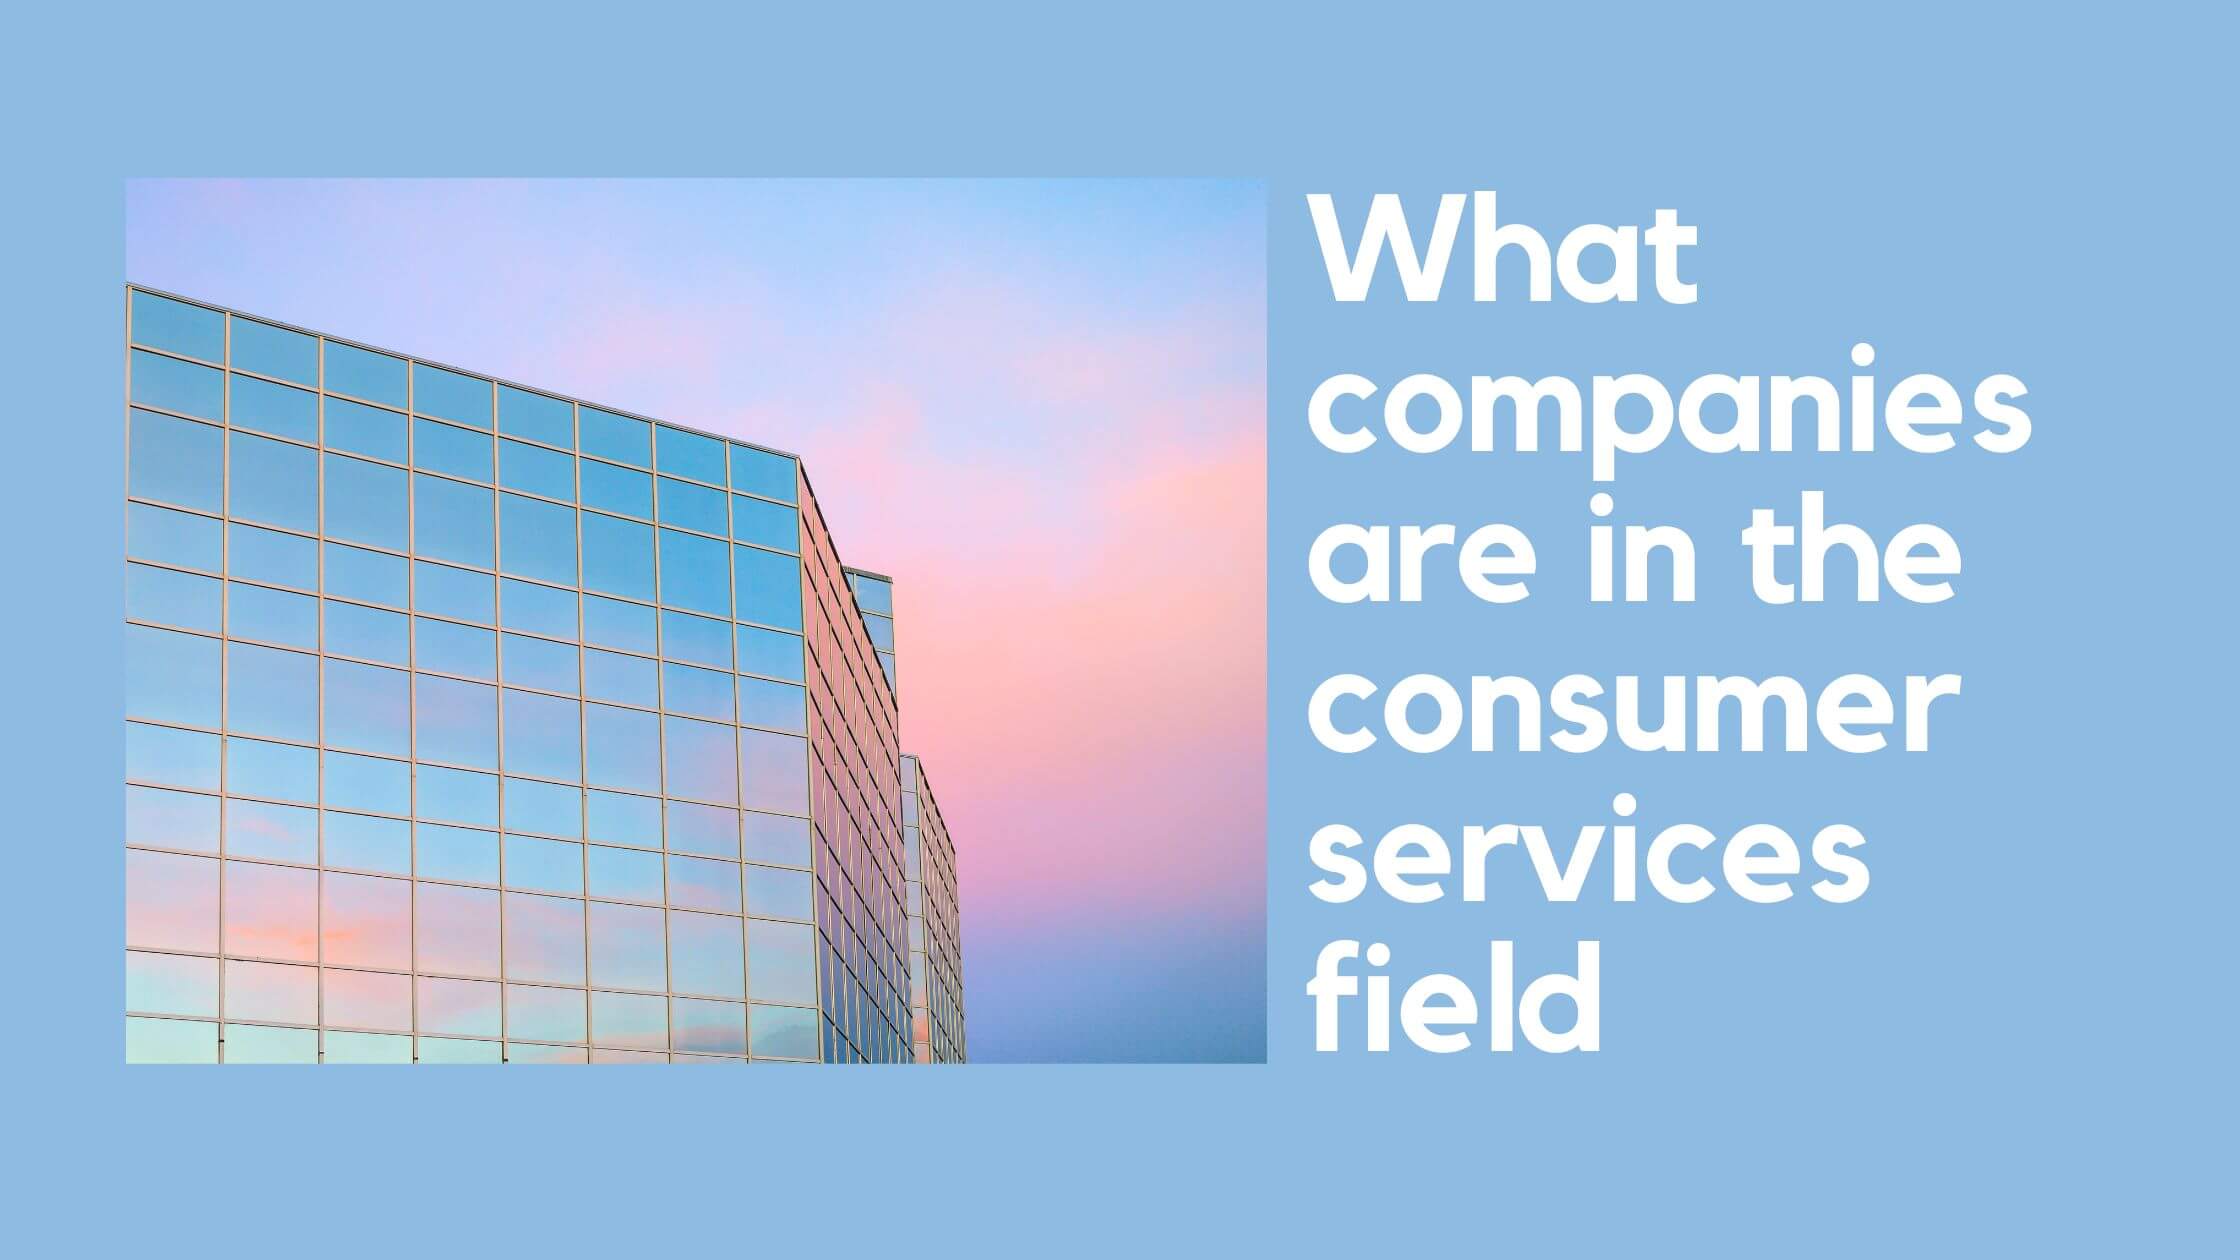 You are currently viewing What companies are in the consumer services field